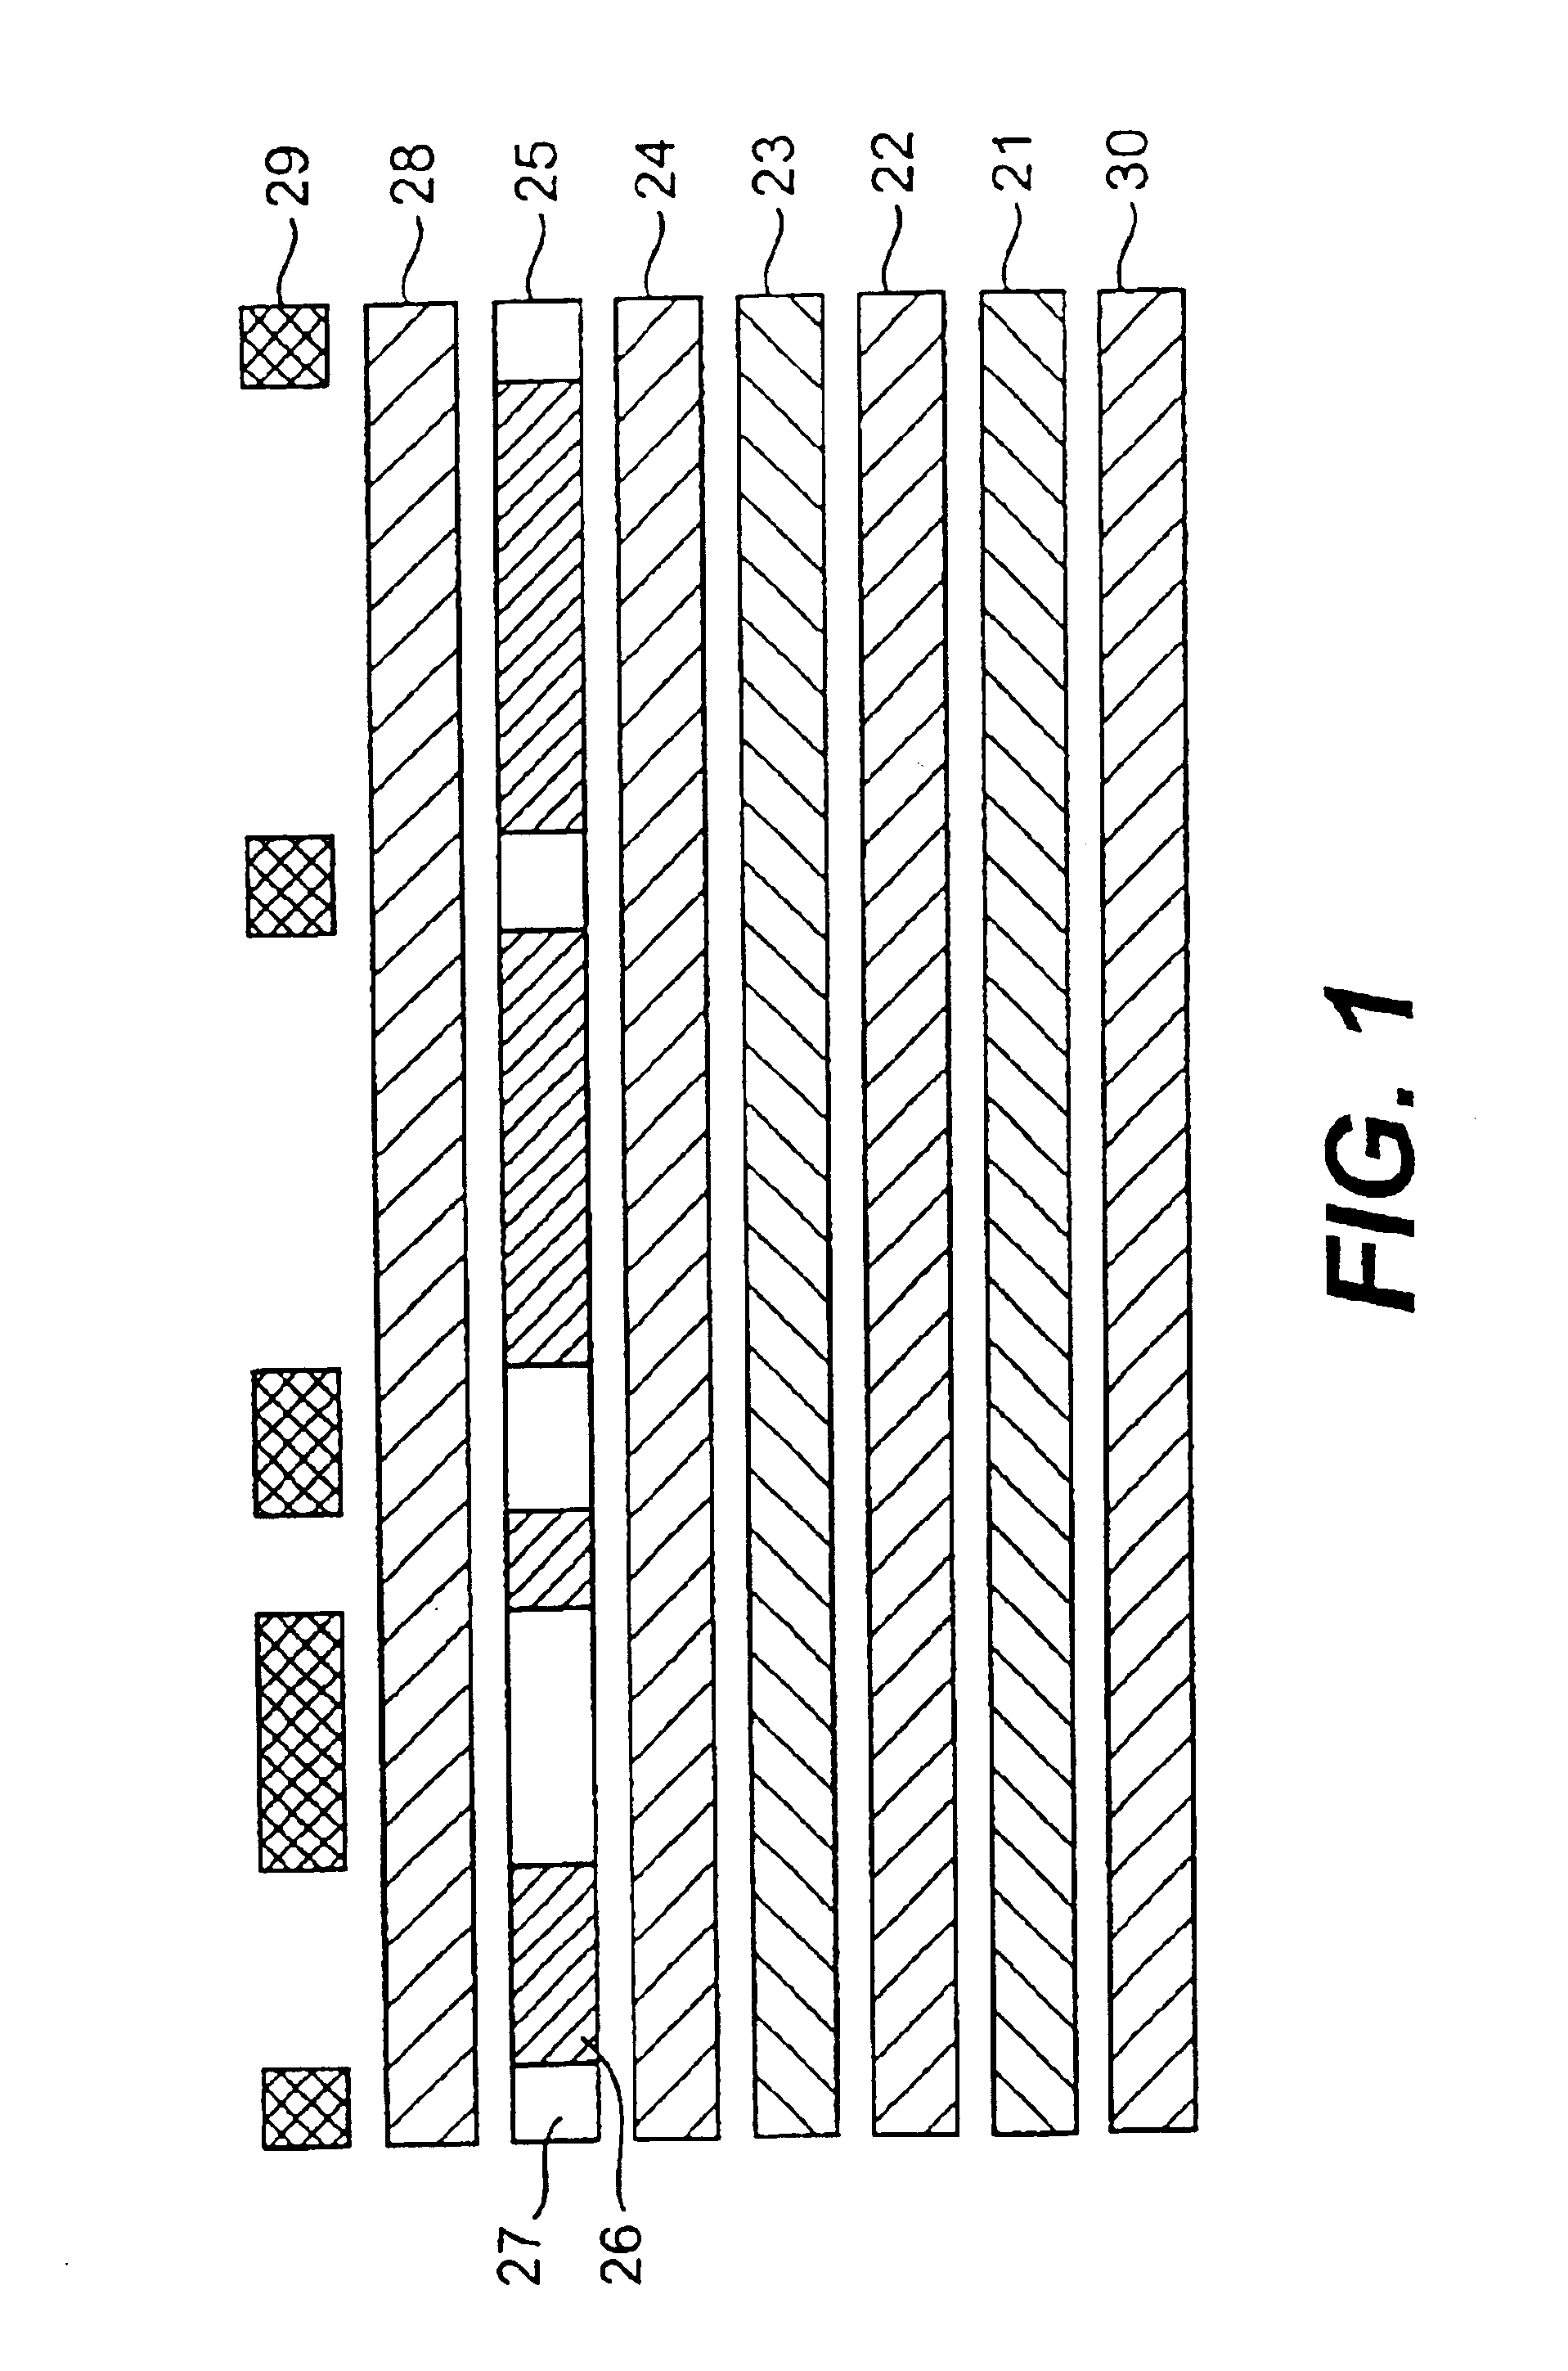 Image transfer sheet with transfer blocking overcoat and heat transfer process using the same